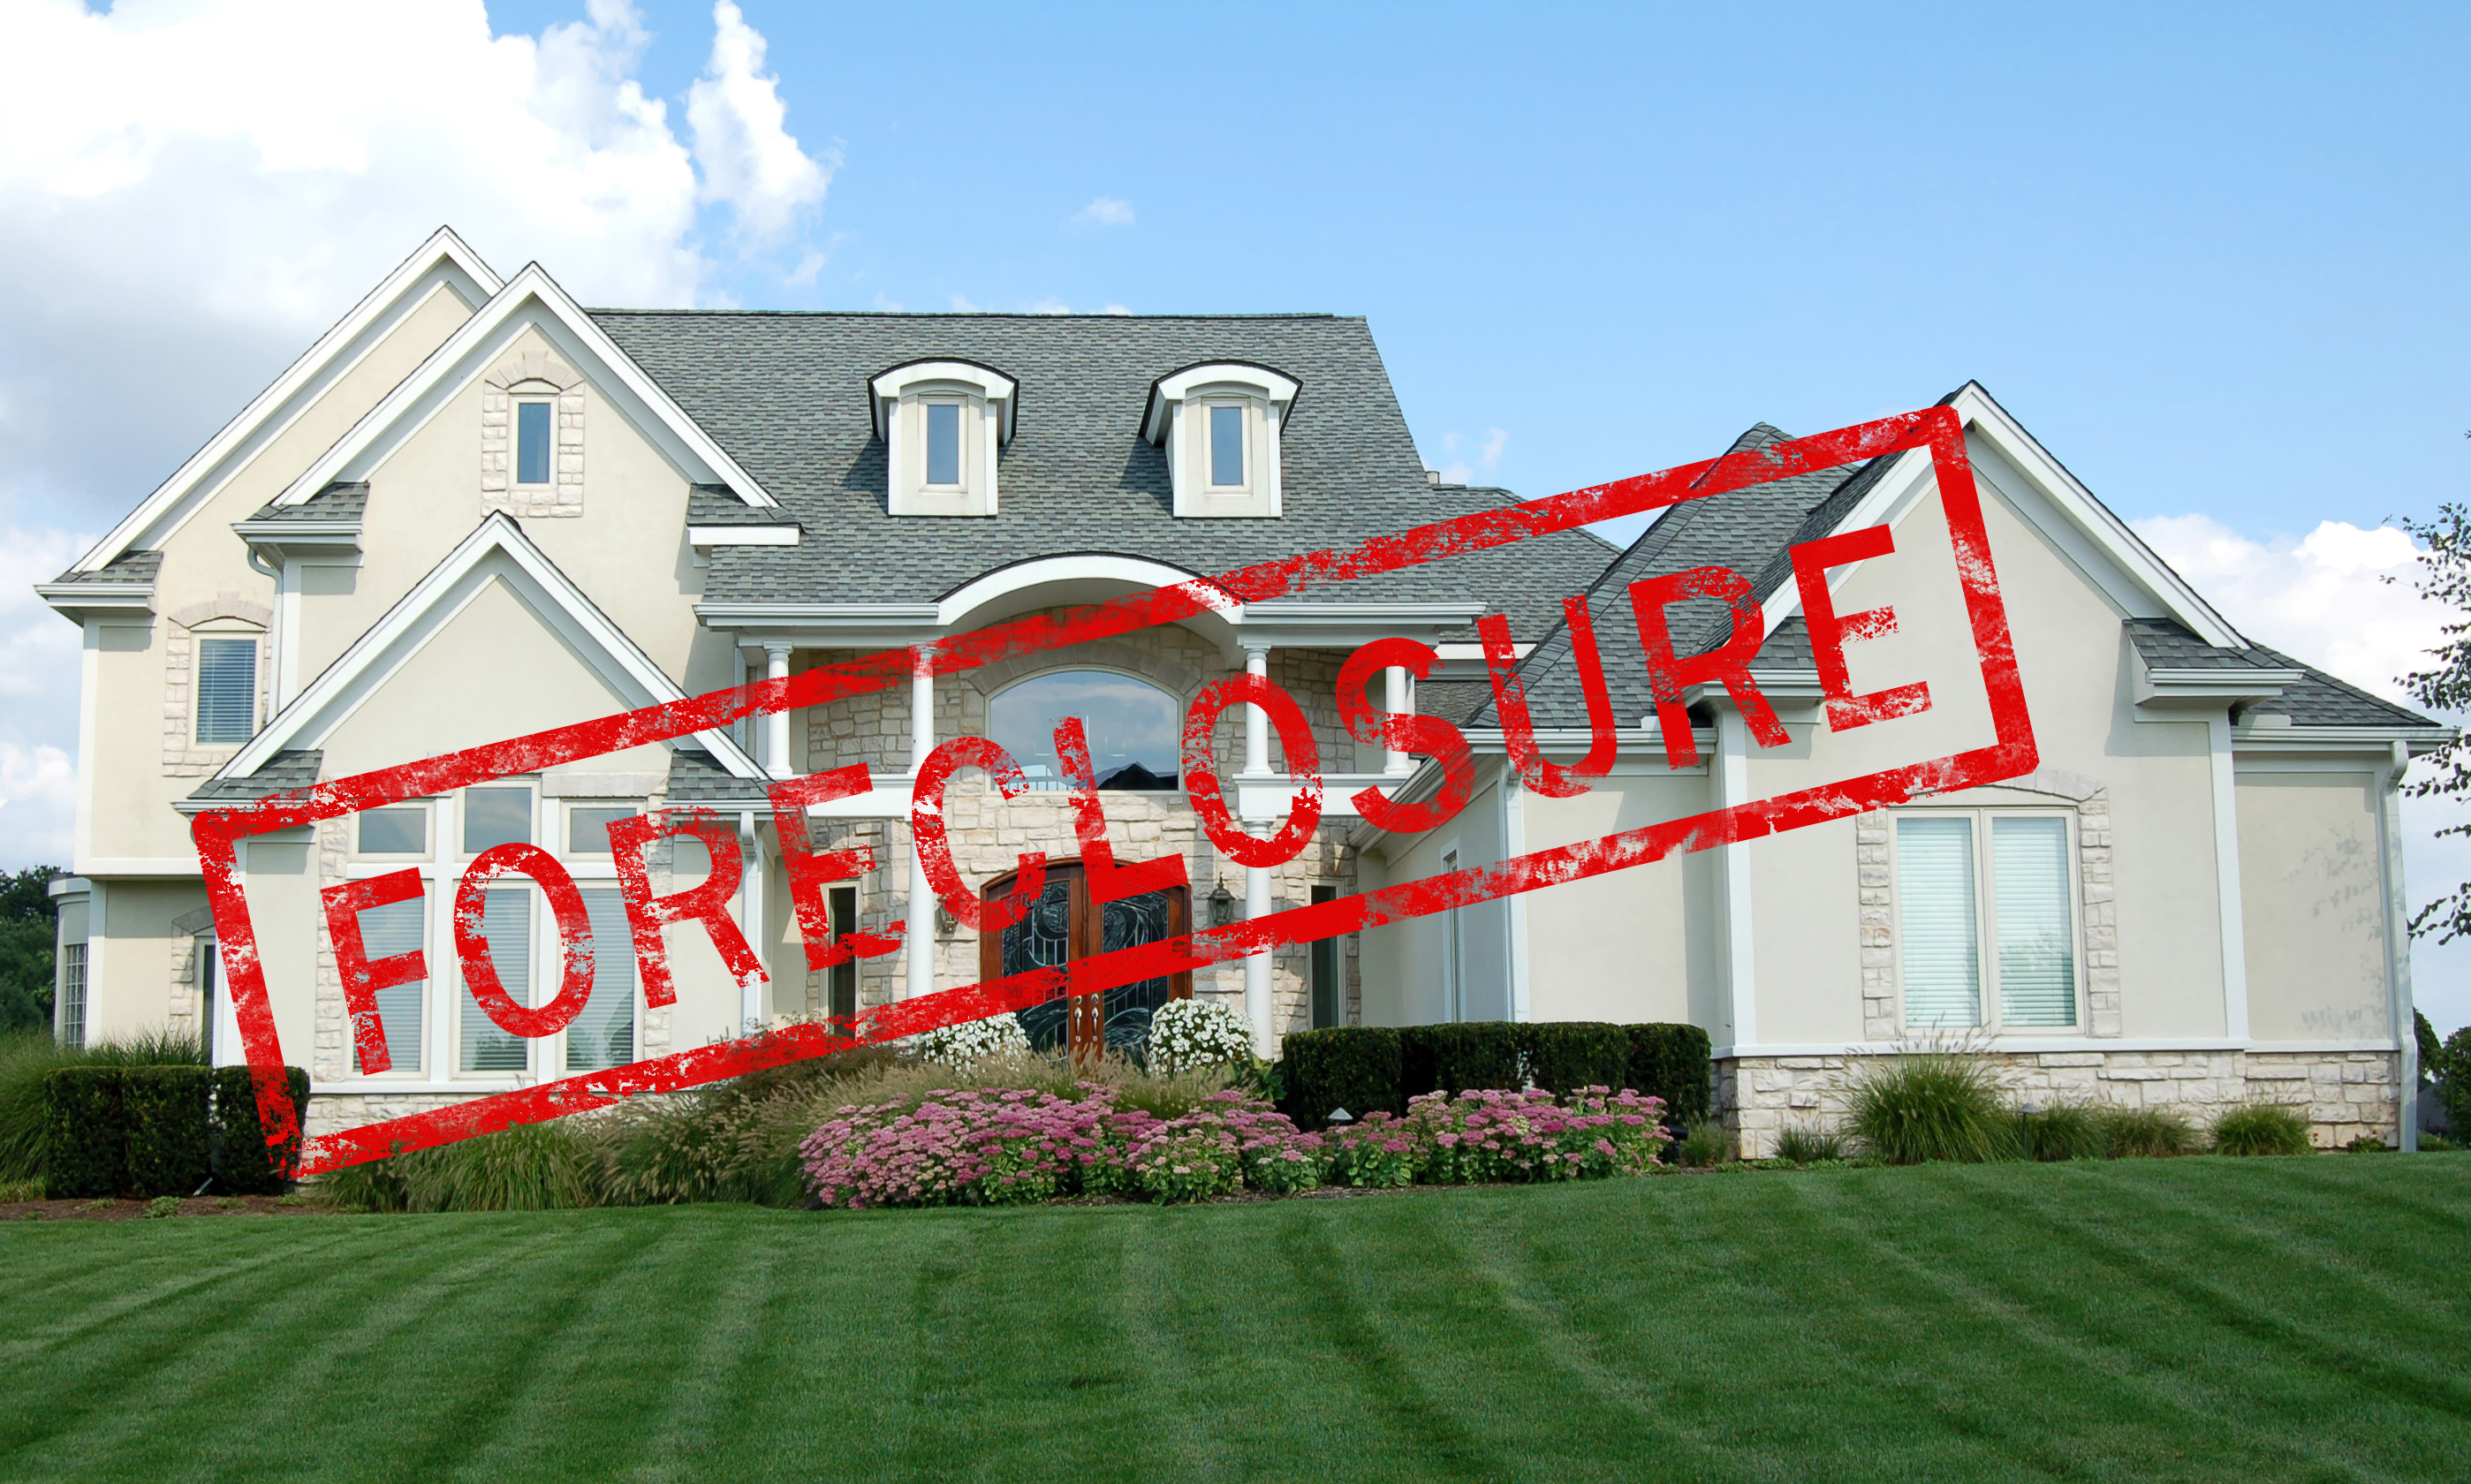 Call Mike Noble Appraisals when you need appraisals pertaining to Elmore foreclosures